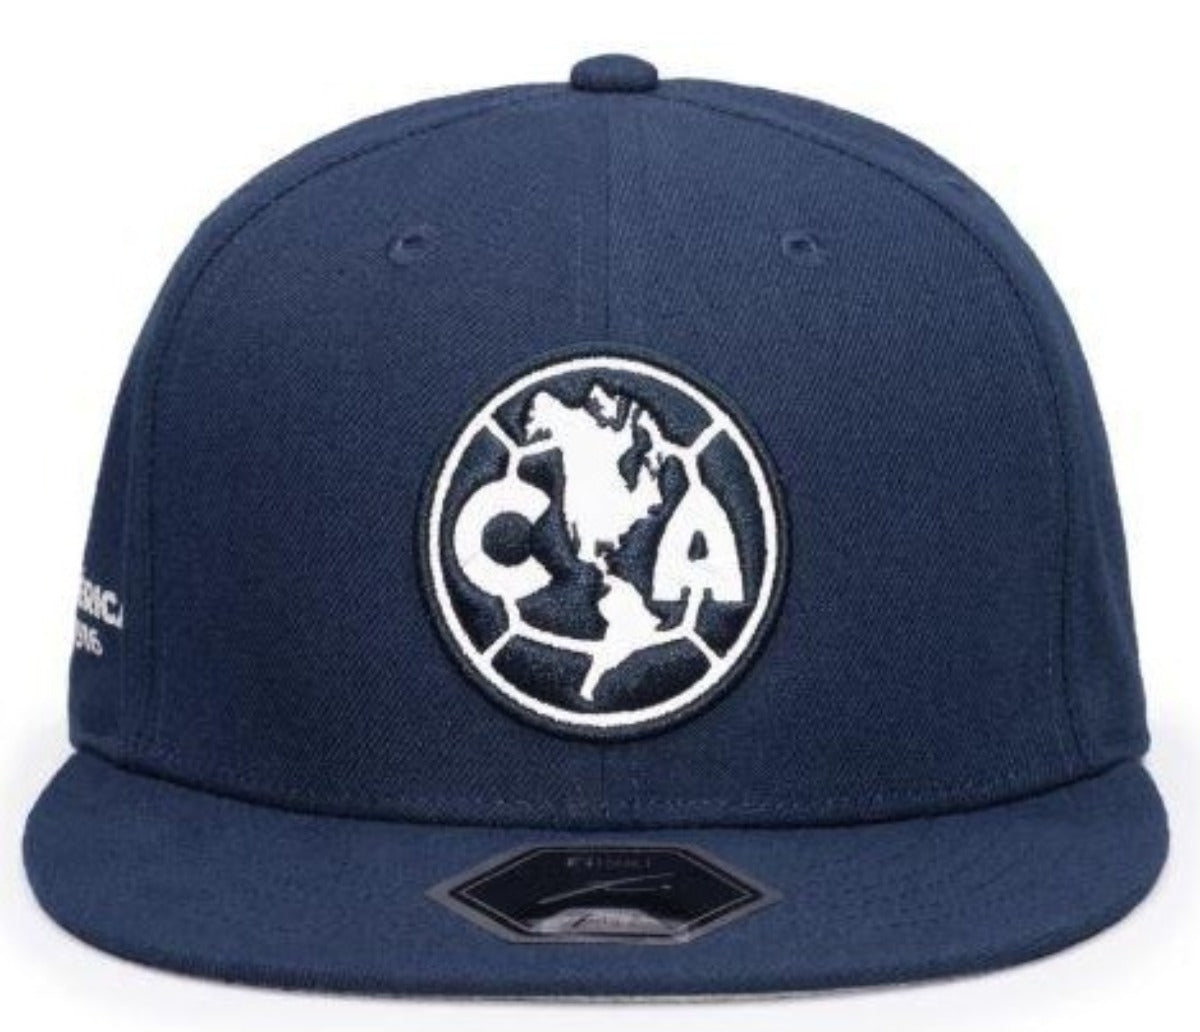 FI COLLECTION CLUB AMERICA BRAVEHEART FITTED HAT-NAVY